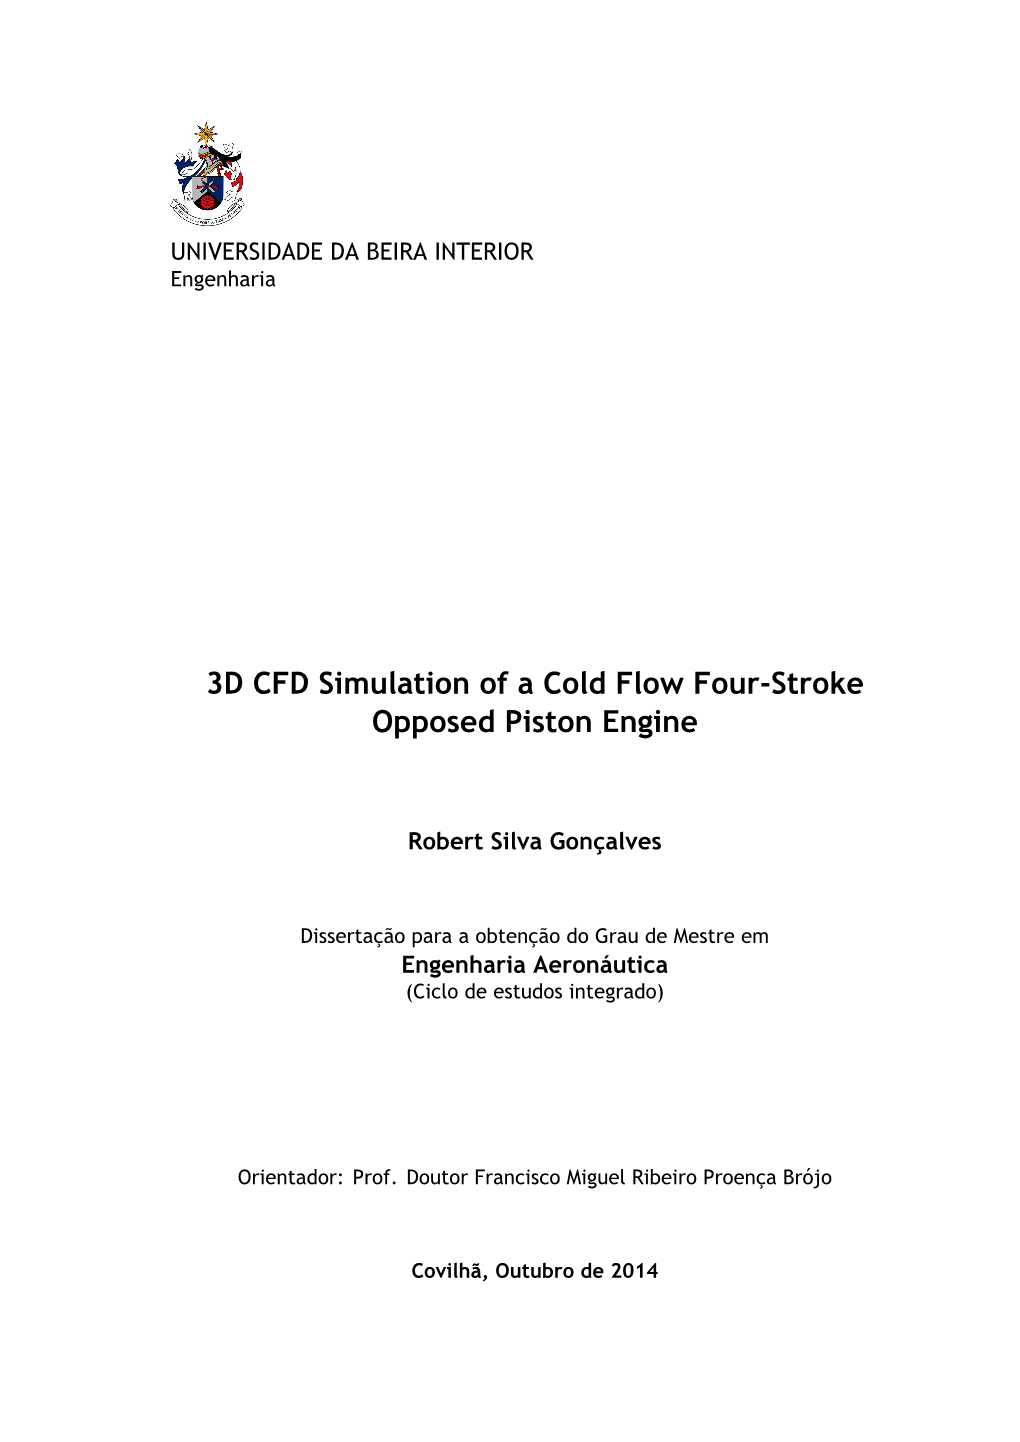 3D CFD Simulation of a Cold Flow Four-Stroke Opposed Piston Engine